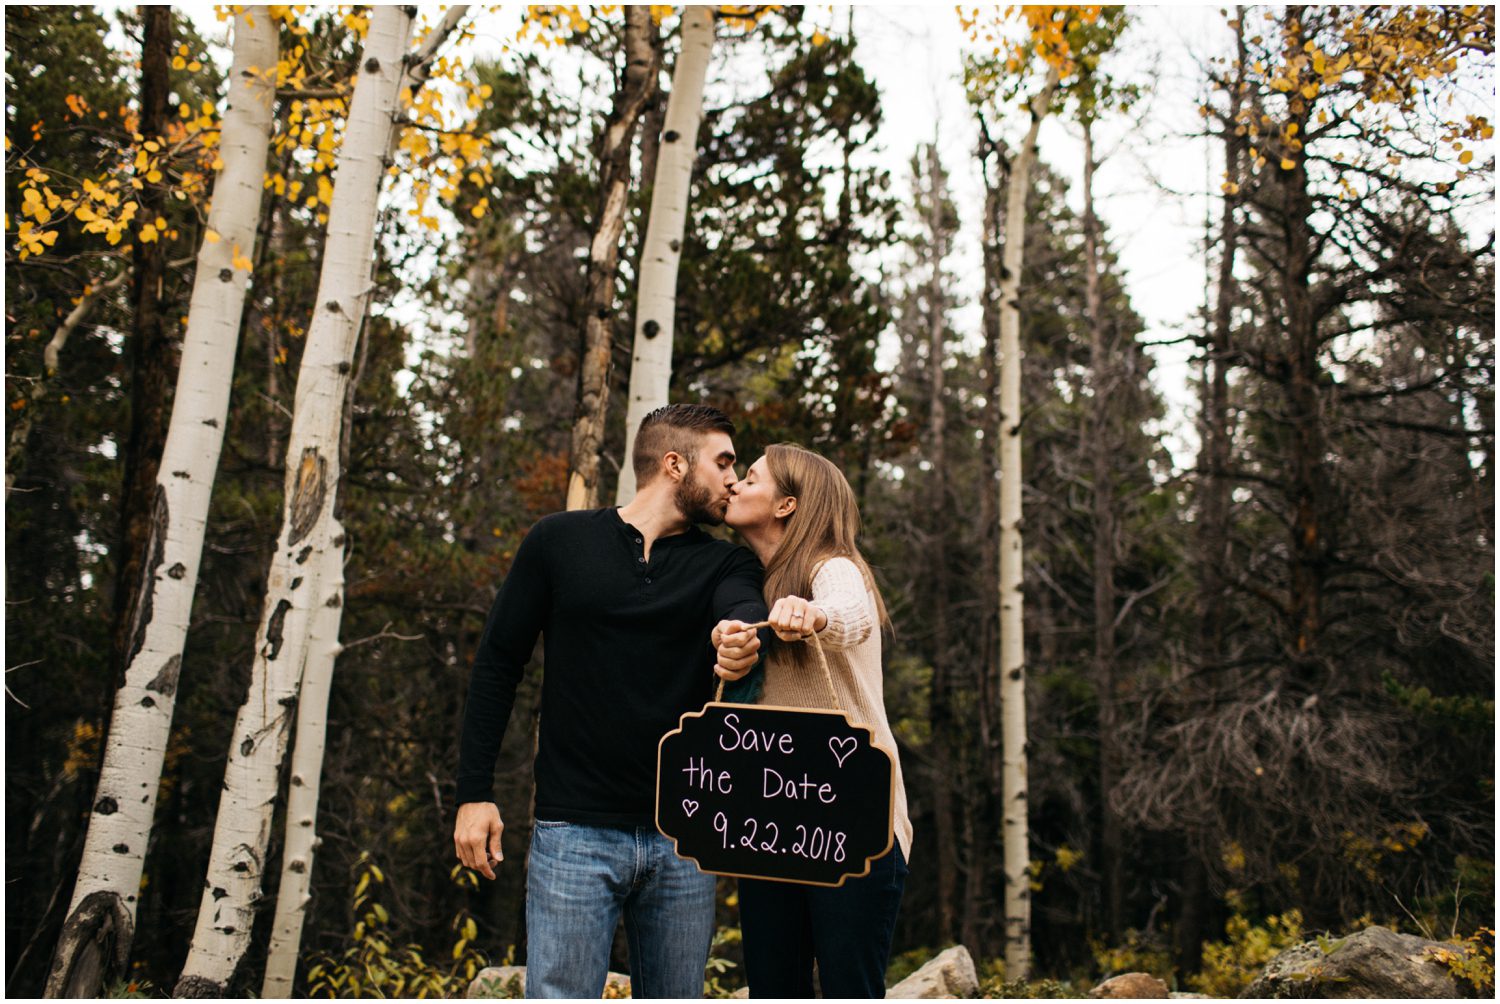 Save the date sign ideas, Save the date inspiration, Save the date wedding photos, Colorado Engagement Photographer, Colorado Fall Engagement Session, Colorado Fall Engagement Photos, Fall Engagement Photos in Colorado, Colorado Mountain Engagement Session, Colorado Engagement Session Ideas, Engagement Session Posing